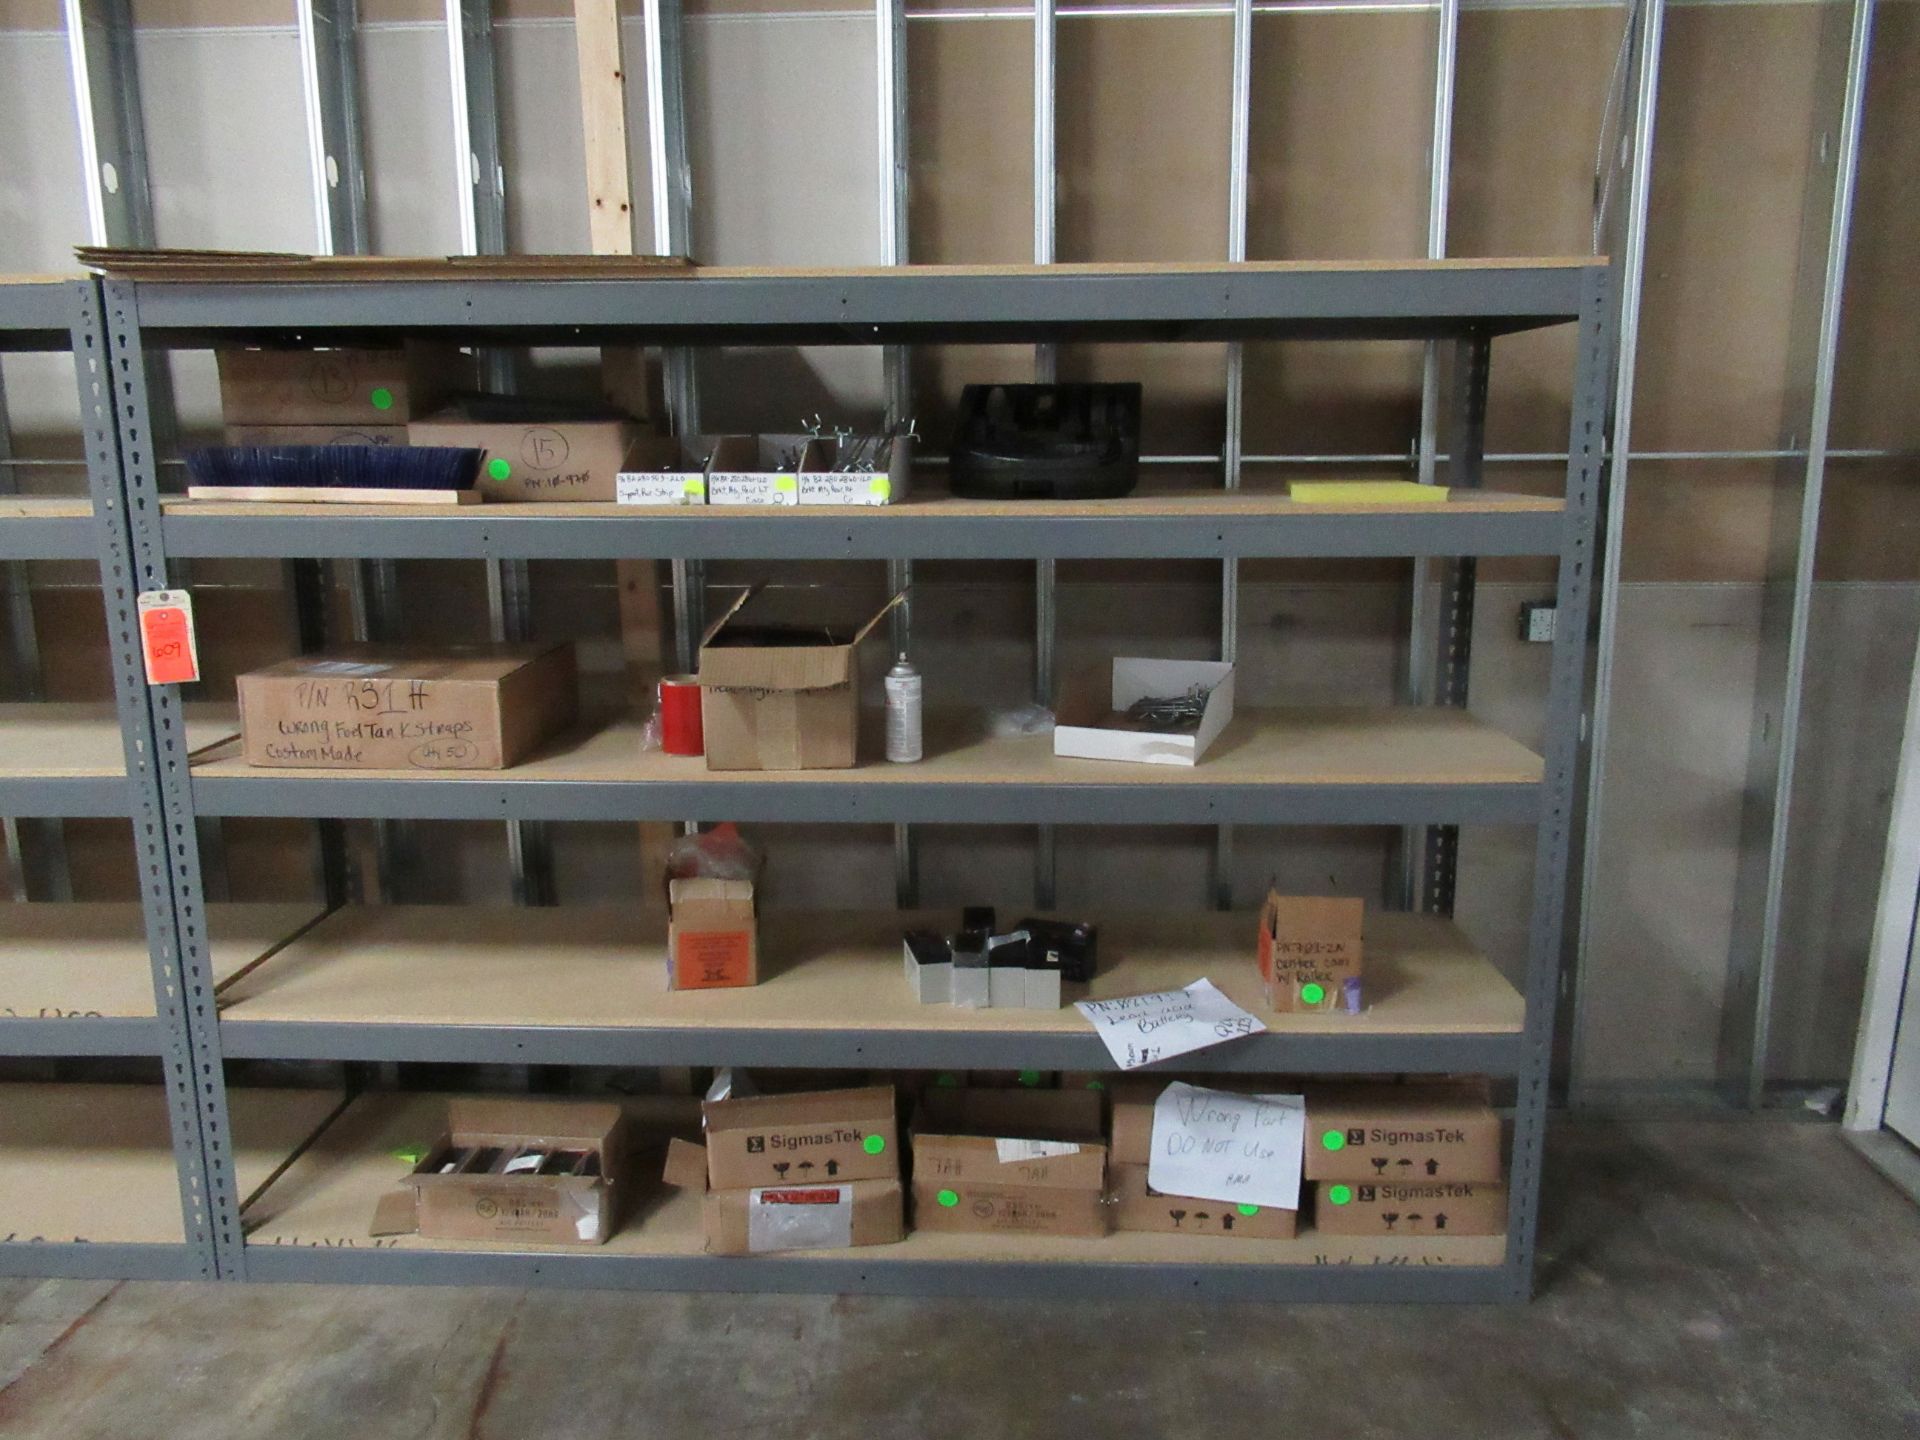 Shelf Contents ONLY. Fuel Tank Straps, GE Headlight Systems, Handbrakes, Batteries, and more!